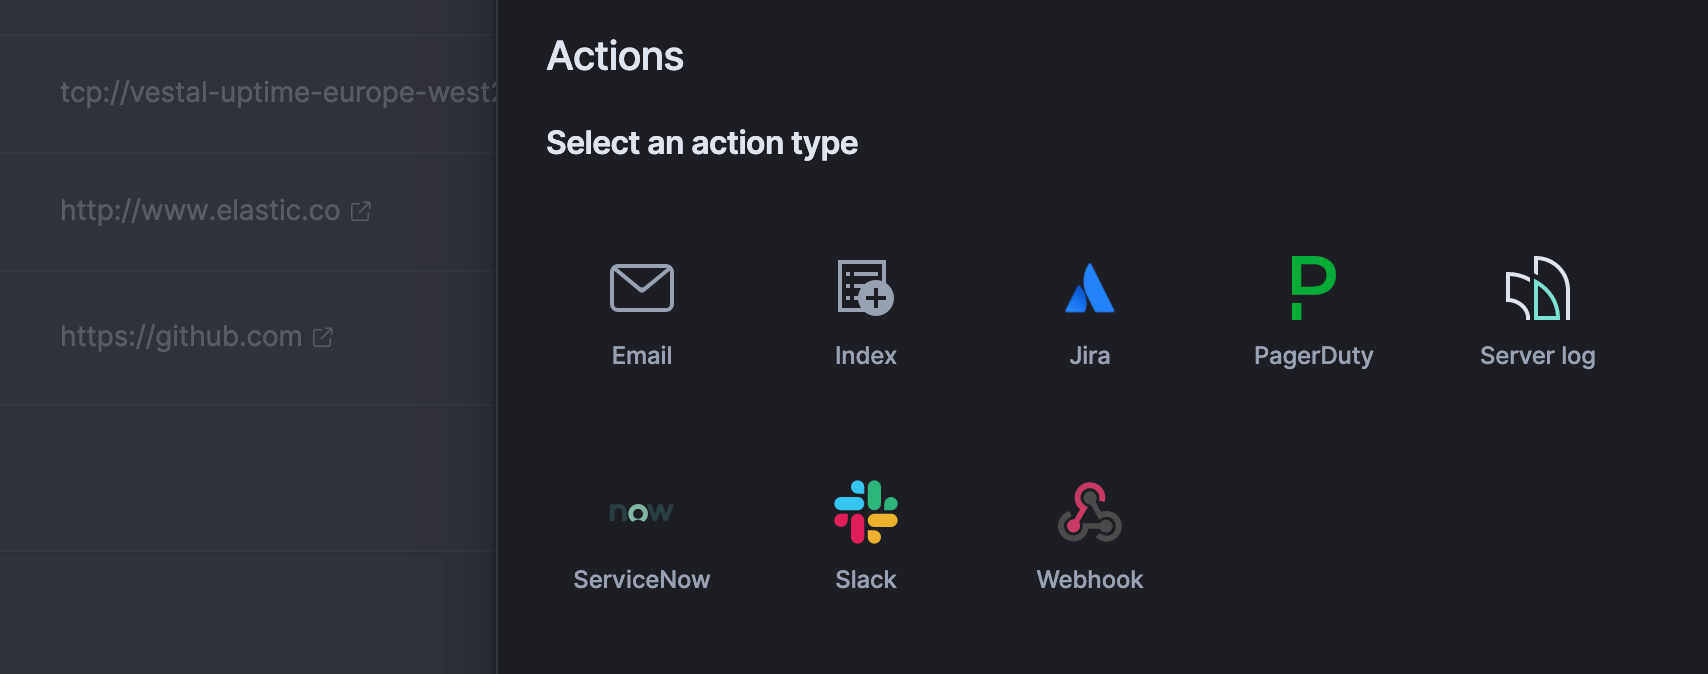 Selecting an action type